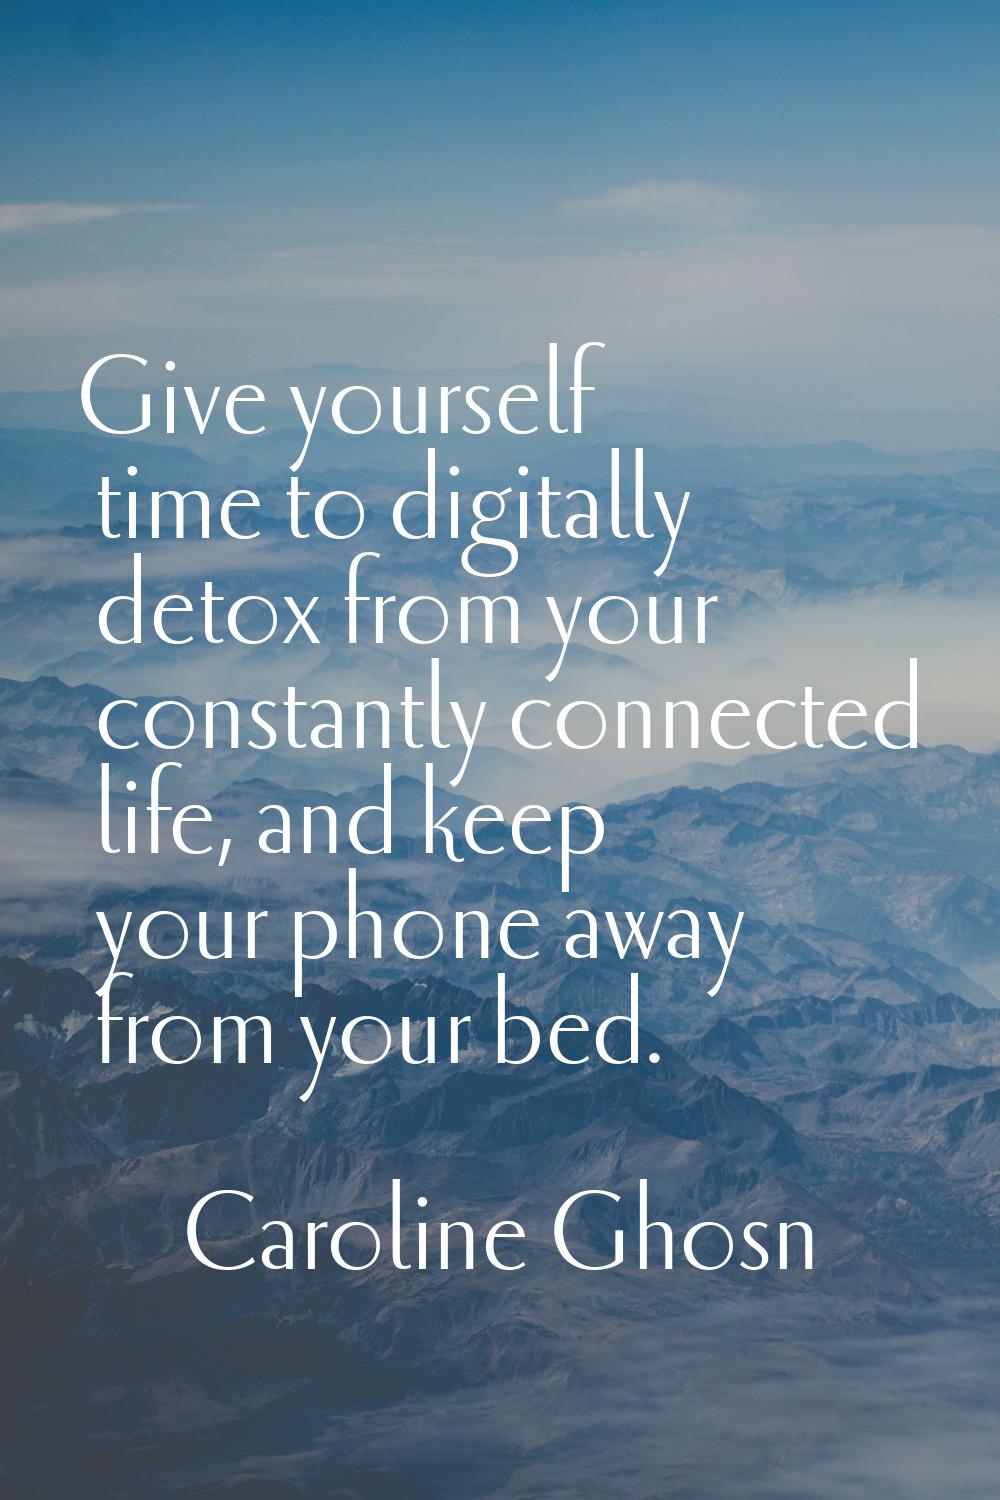 Give yourself time to digitally detox from your constantly connected life, and keep your phone away